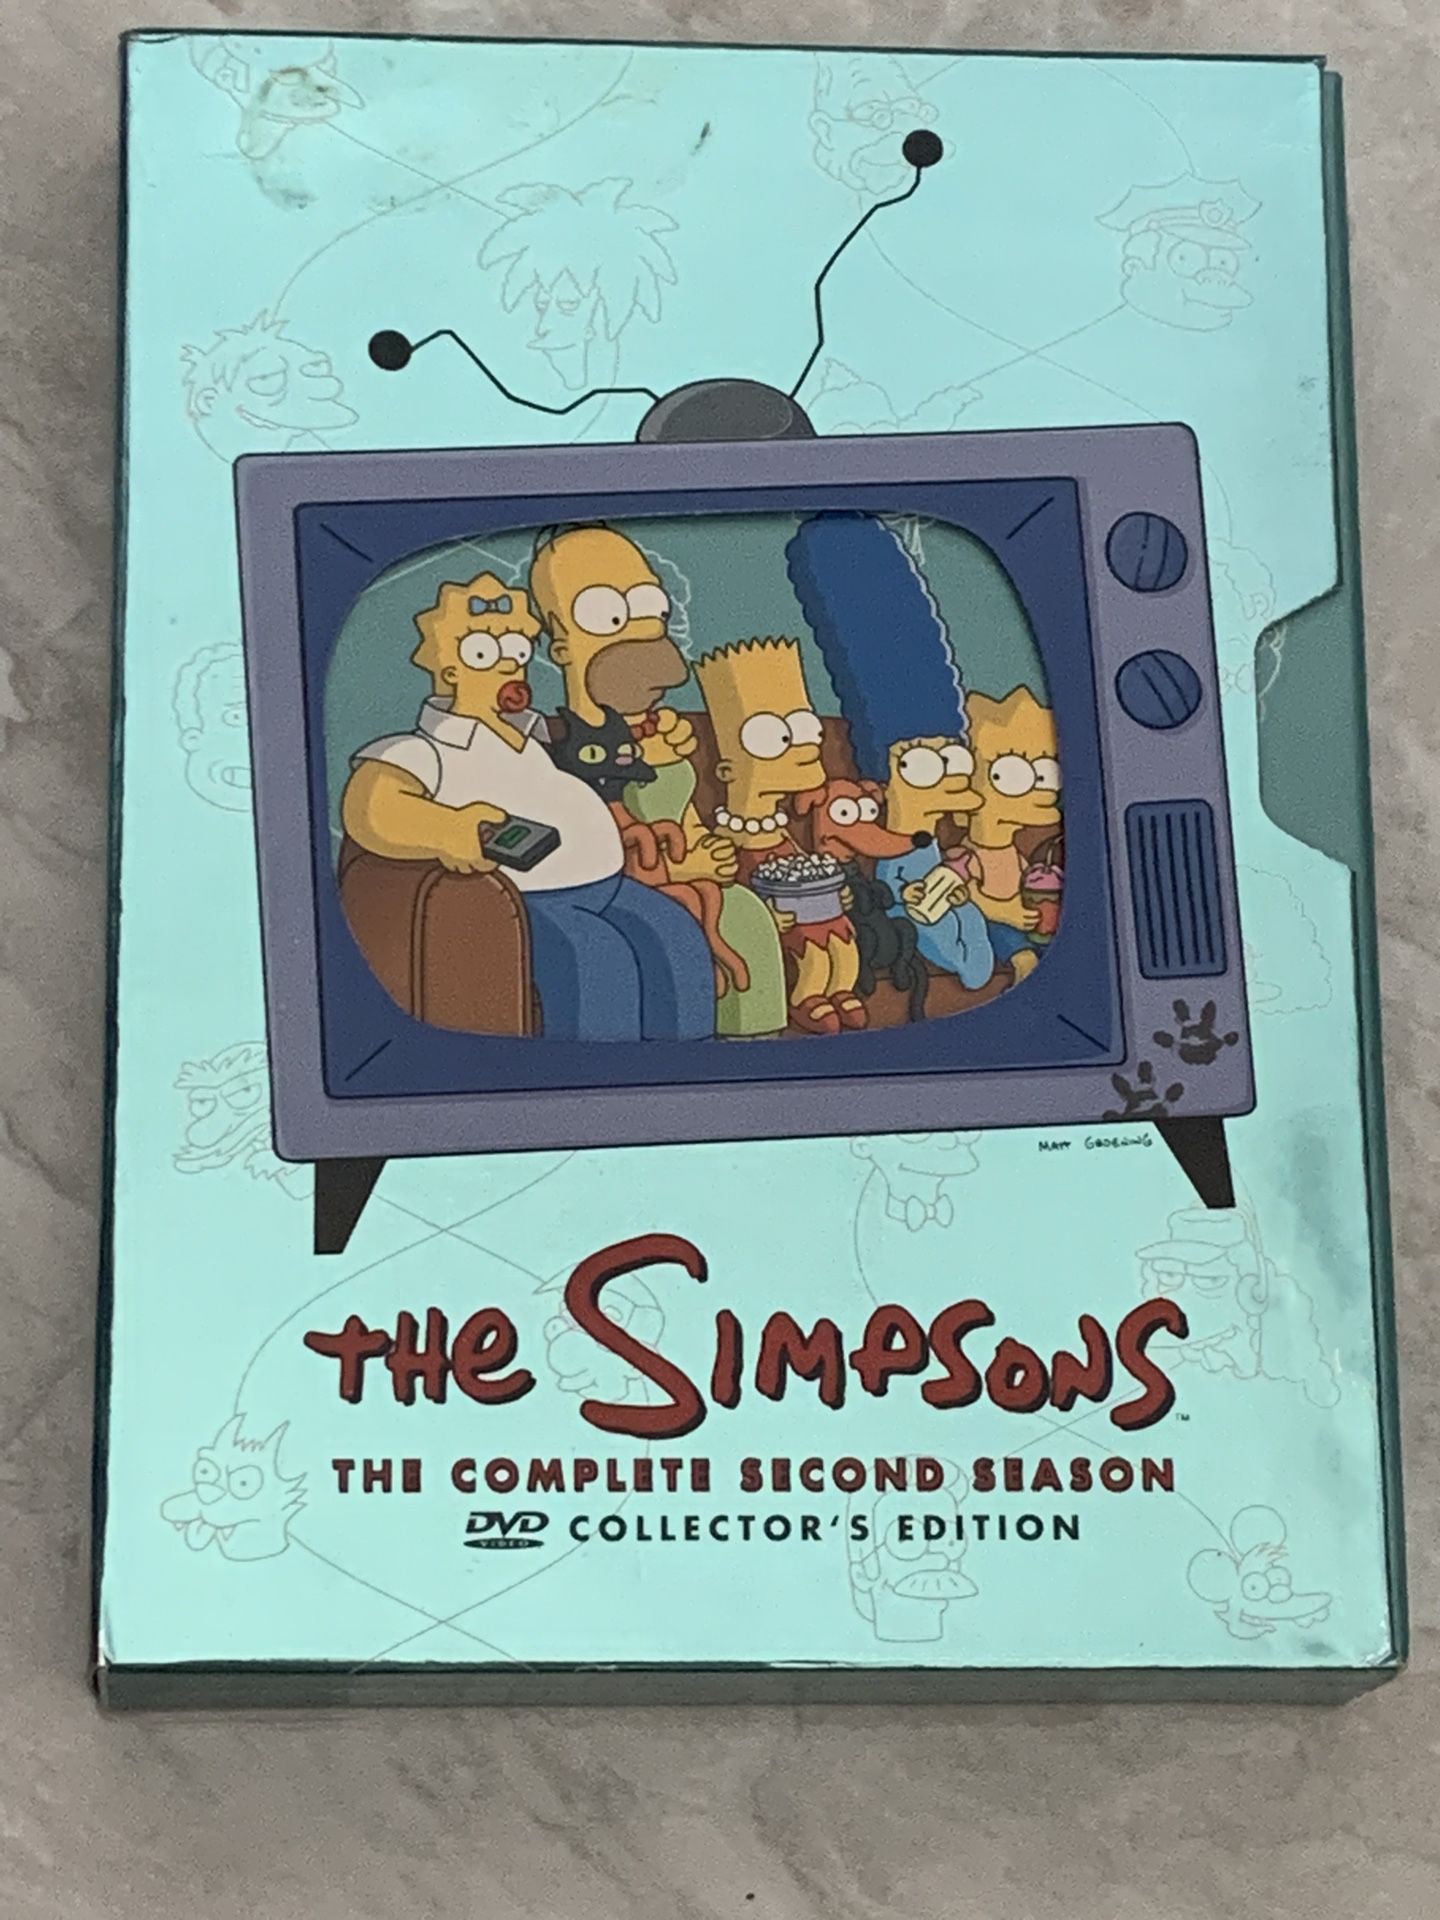 The Simpsons - The Complete Second Season - DVD